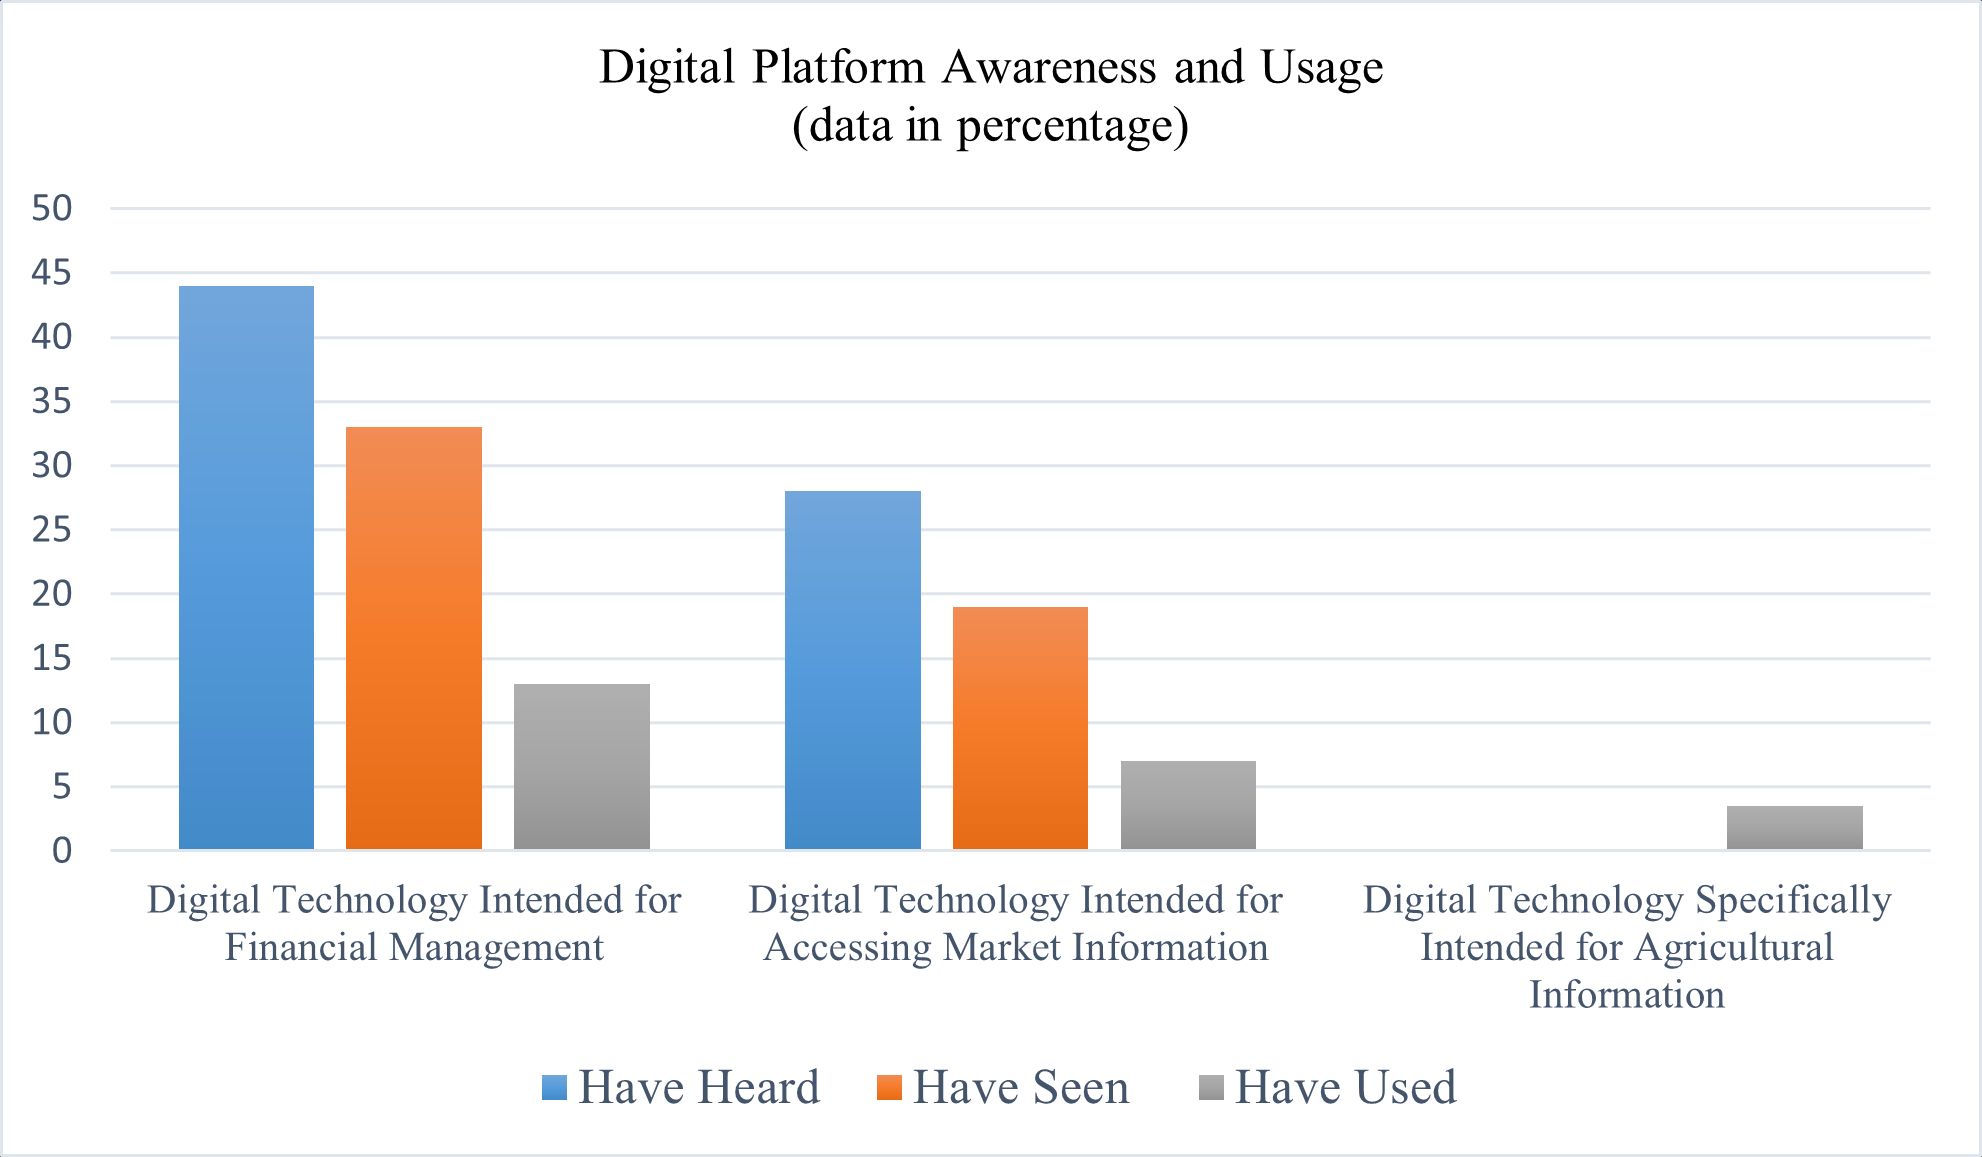 Exposure and Adoption of Digital Platforms for Agriculture, Markets, and Financial Management